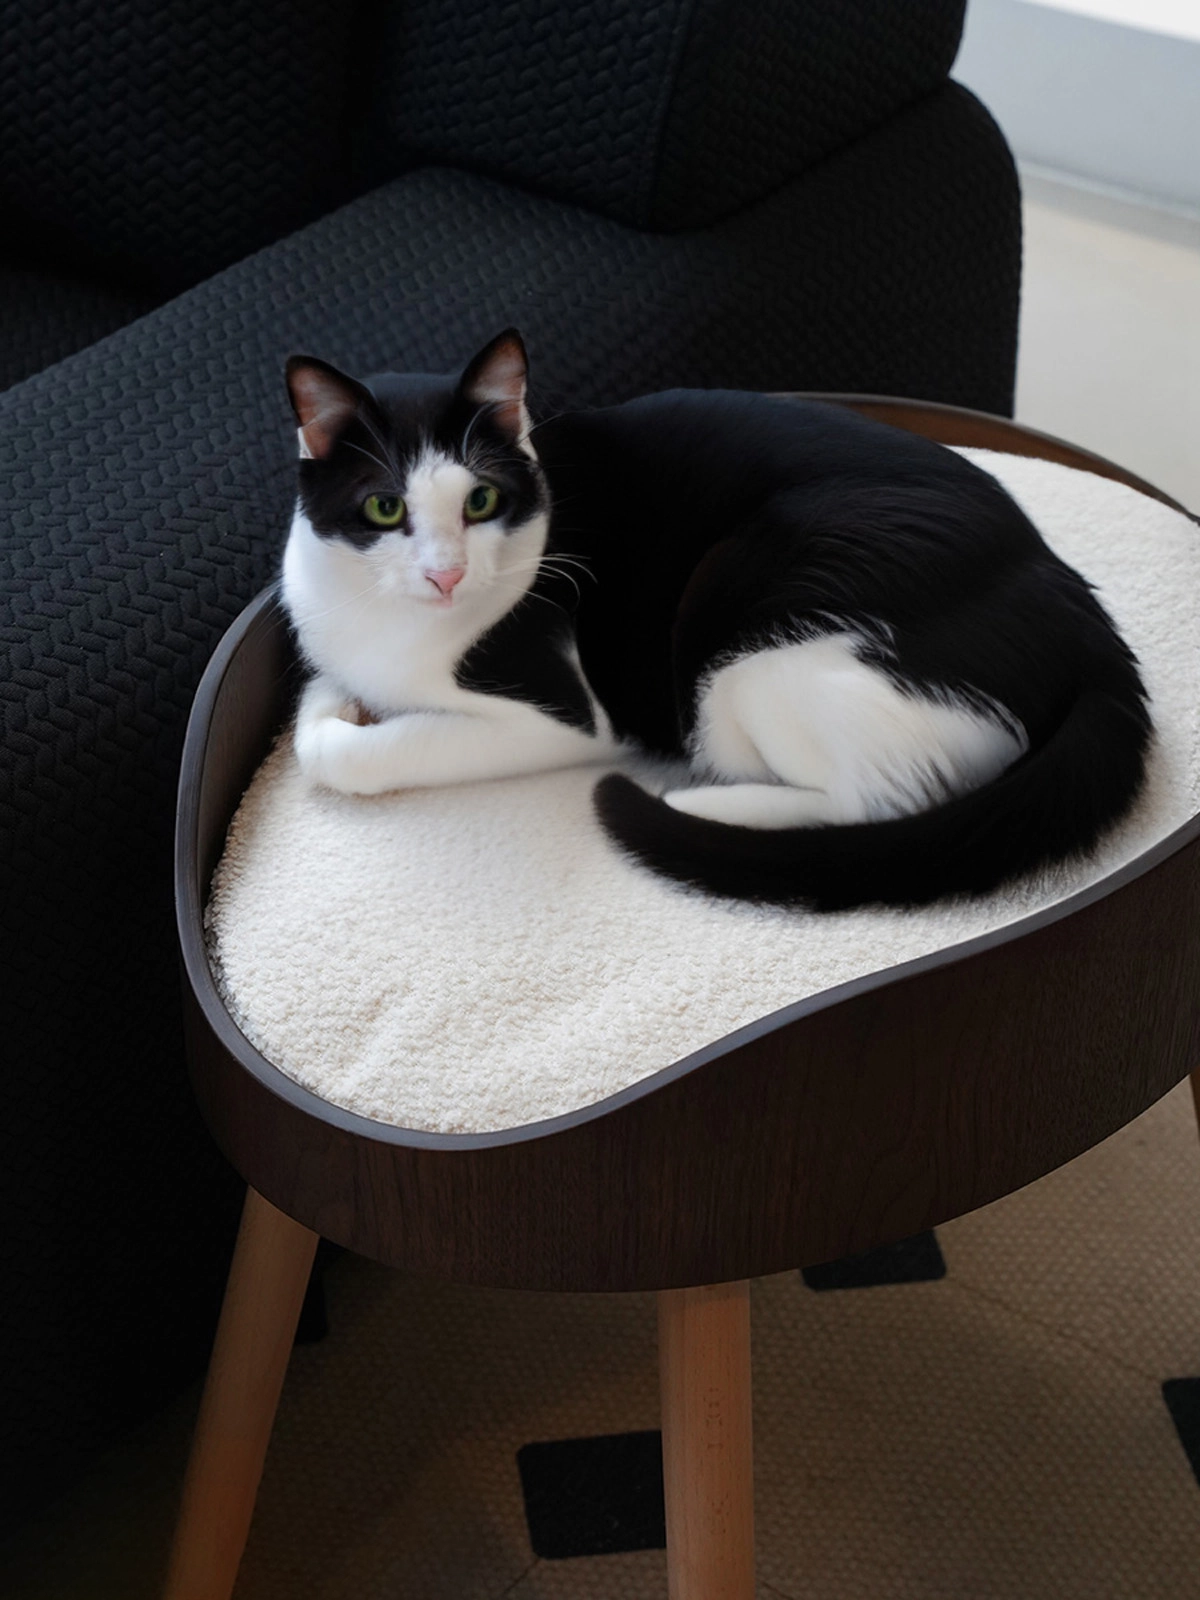 A furry cat is lying on an exquisite elevated solid wood cat bed.